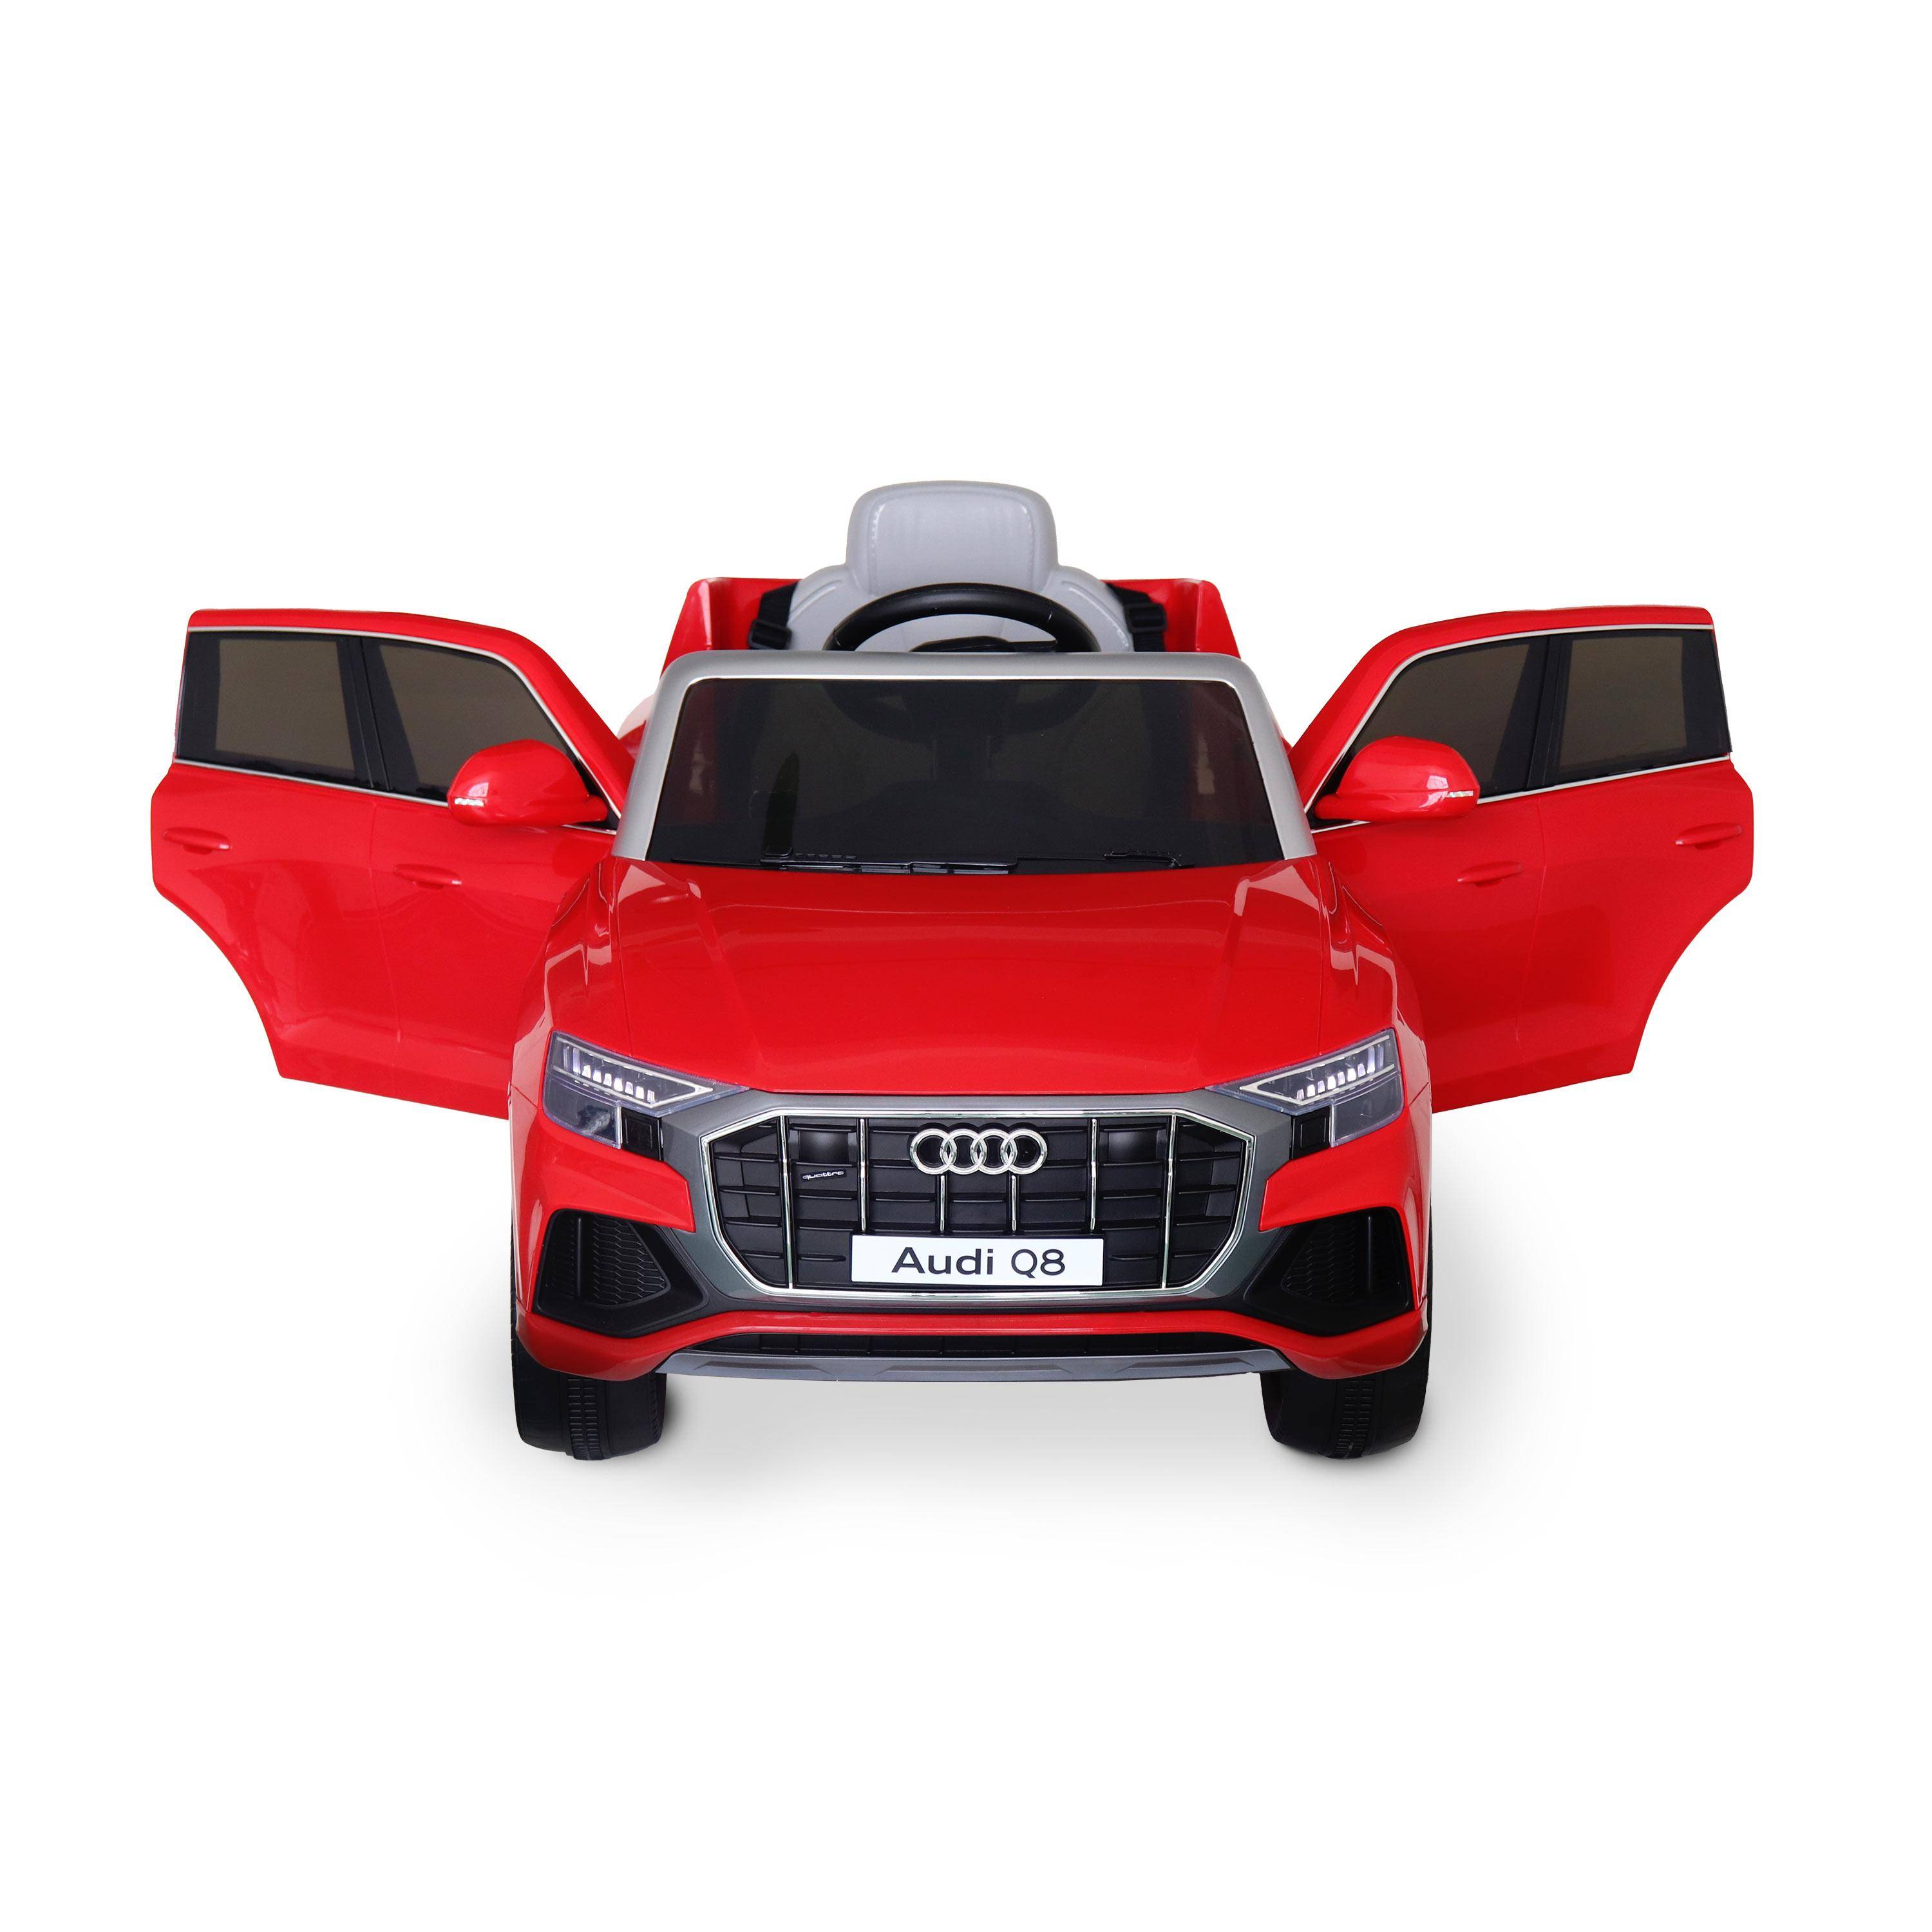 Children's electric car 12V, 1 seat with car radio and remote control - AUDI Q8 - Red,sweeek,Photo2